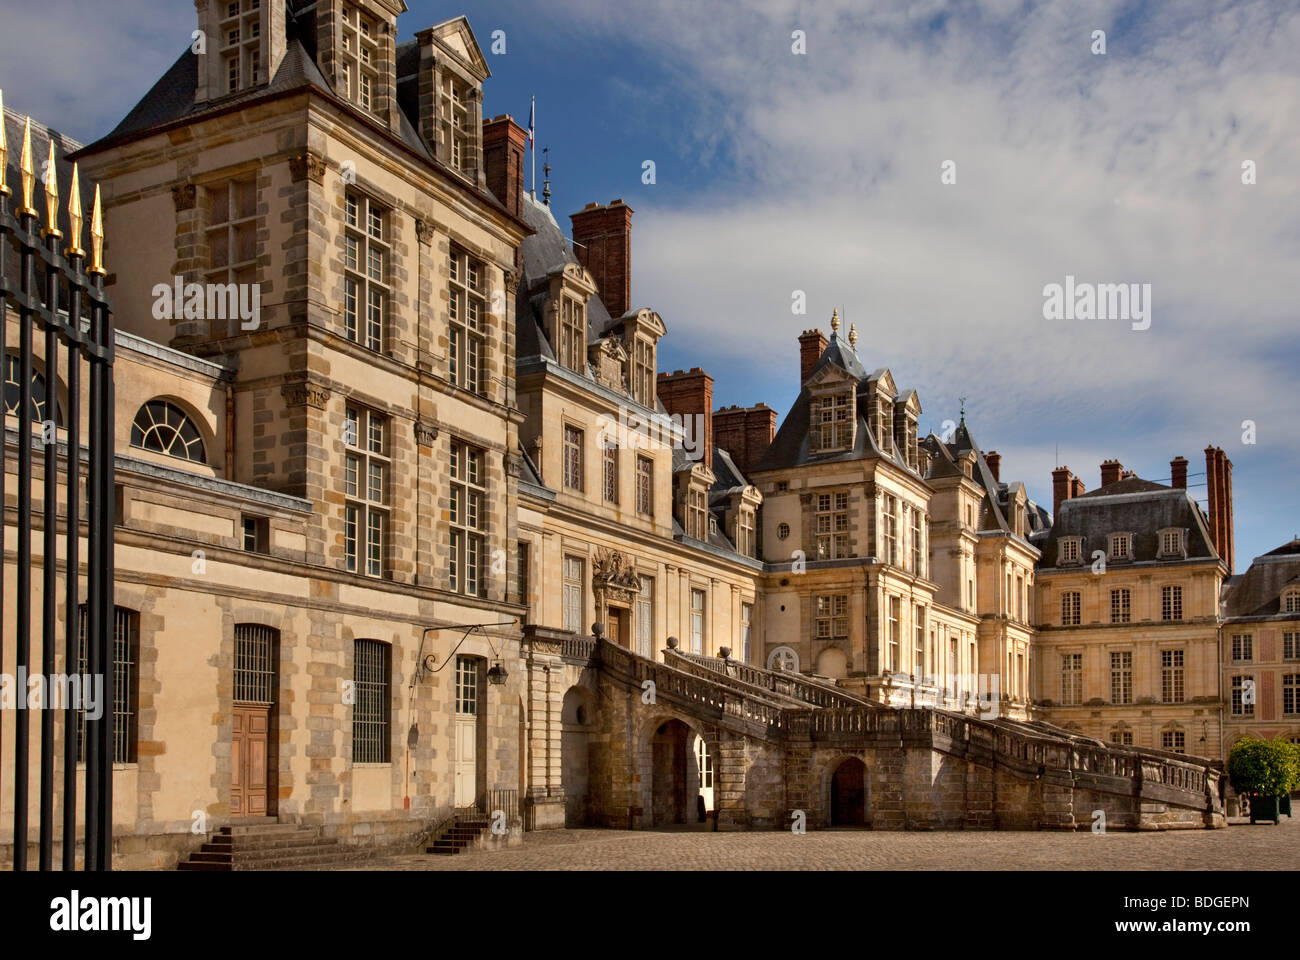 White Horse courtyard and west facade of Fontainebleau Chateau, Paris, France Stock Photo